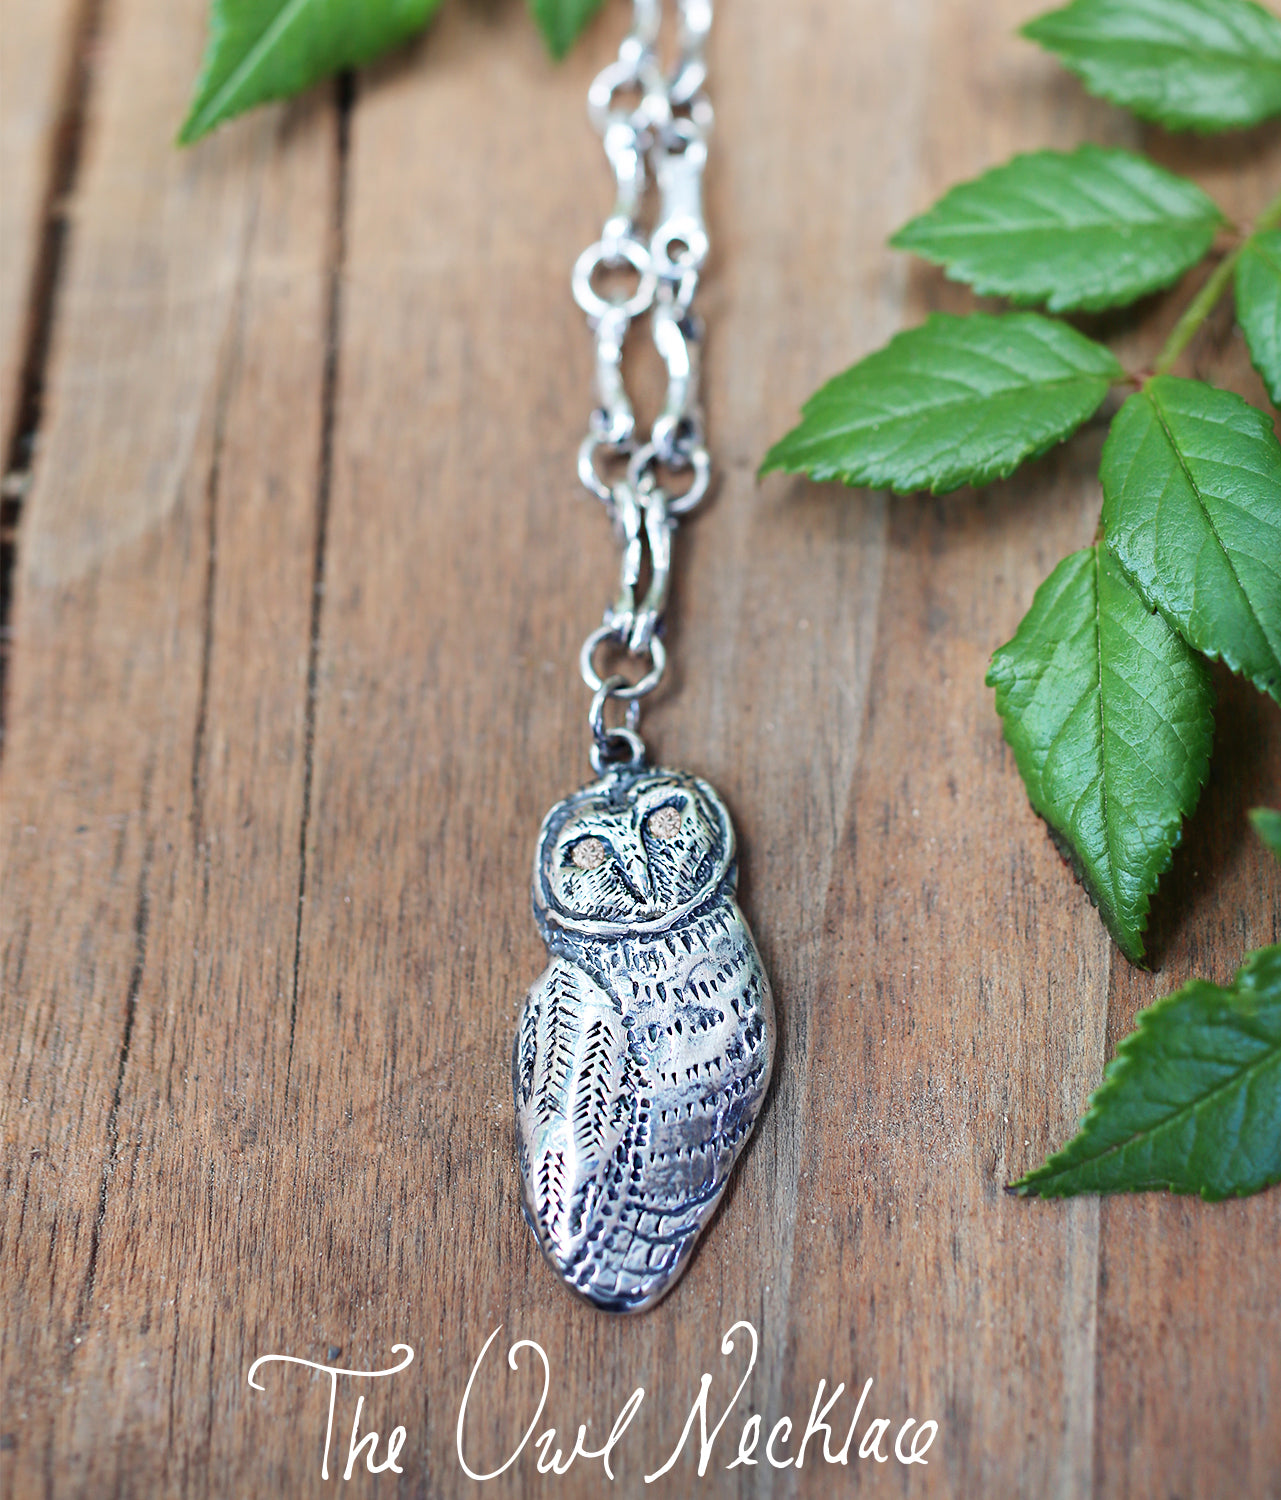 The Owl Necklace